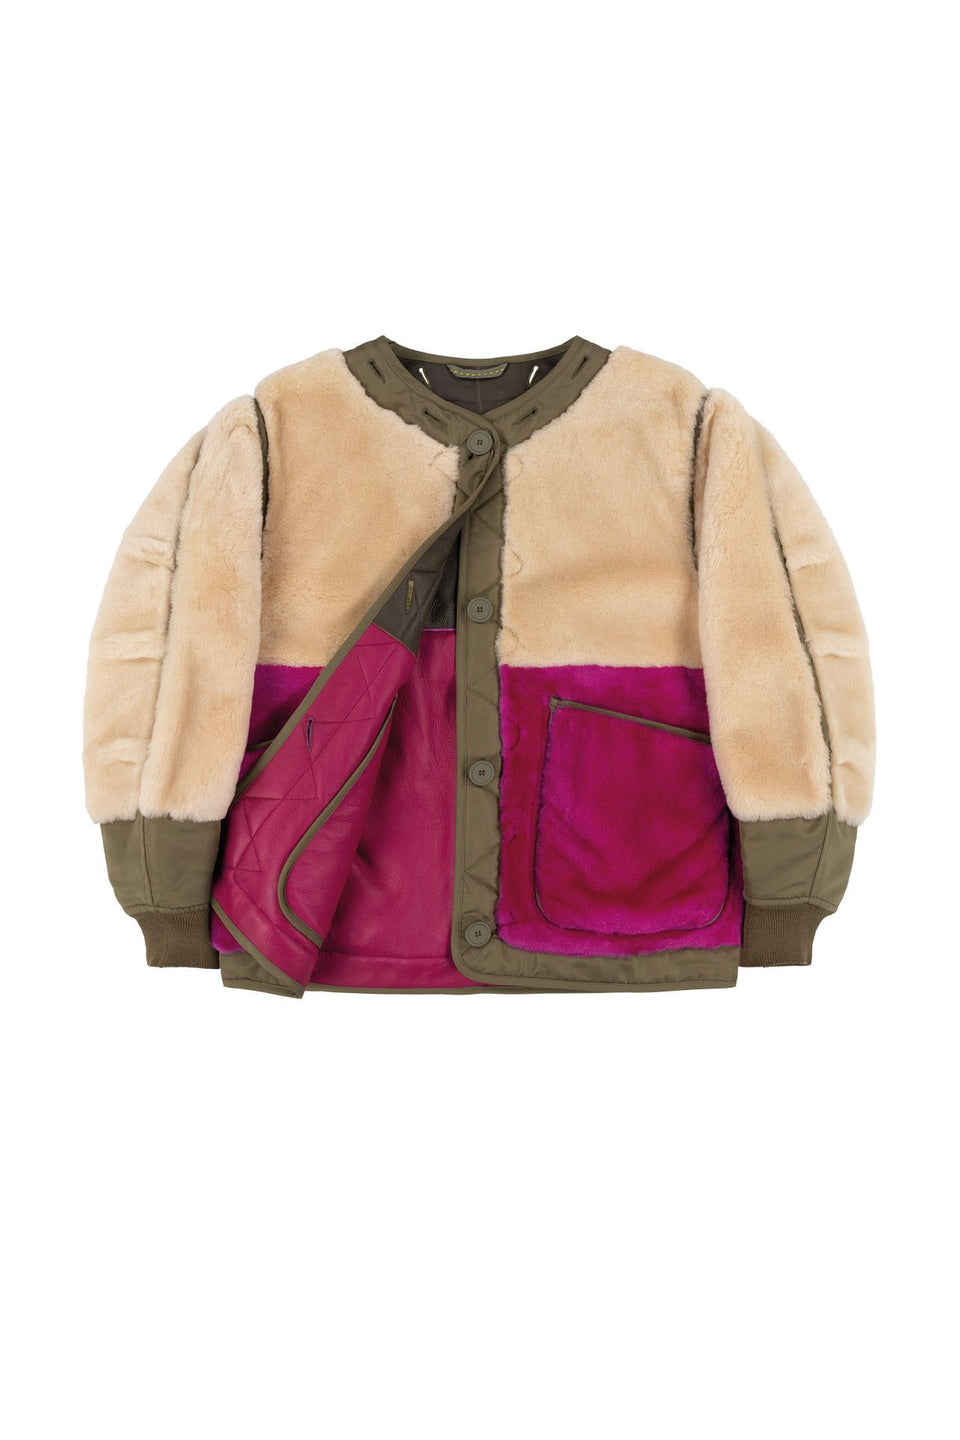 Shearling Quilt Bomber - Blush / Dark Olive (listing page thumbnail)